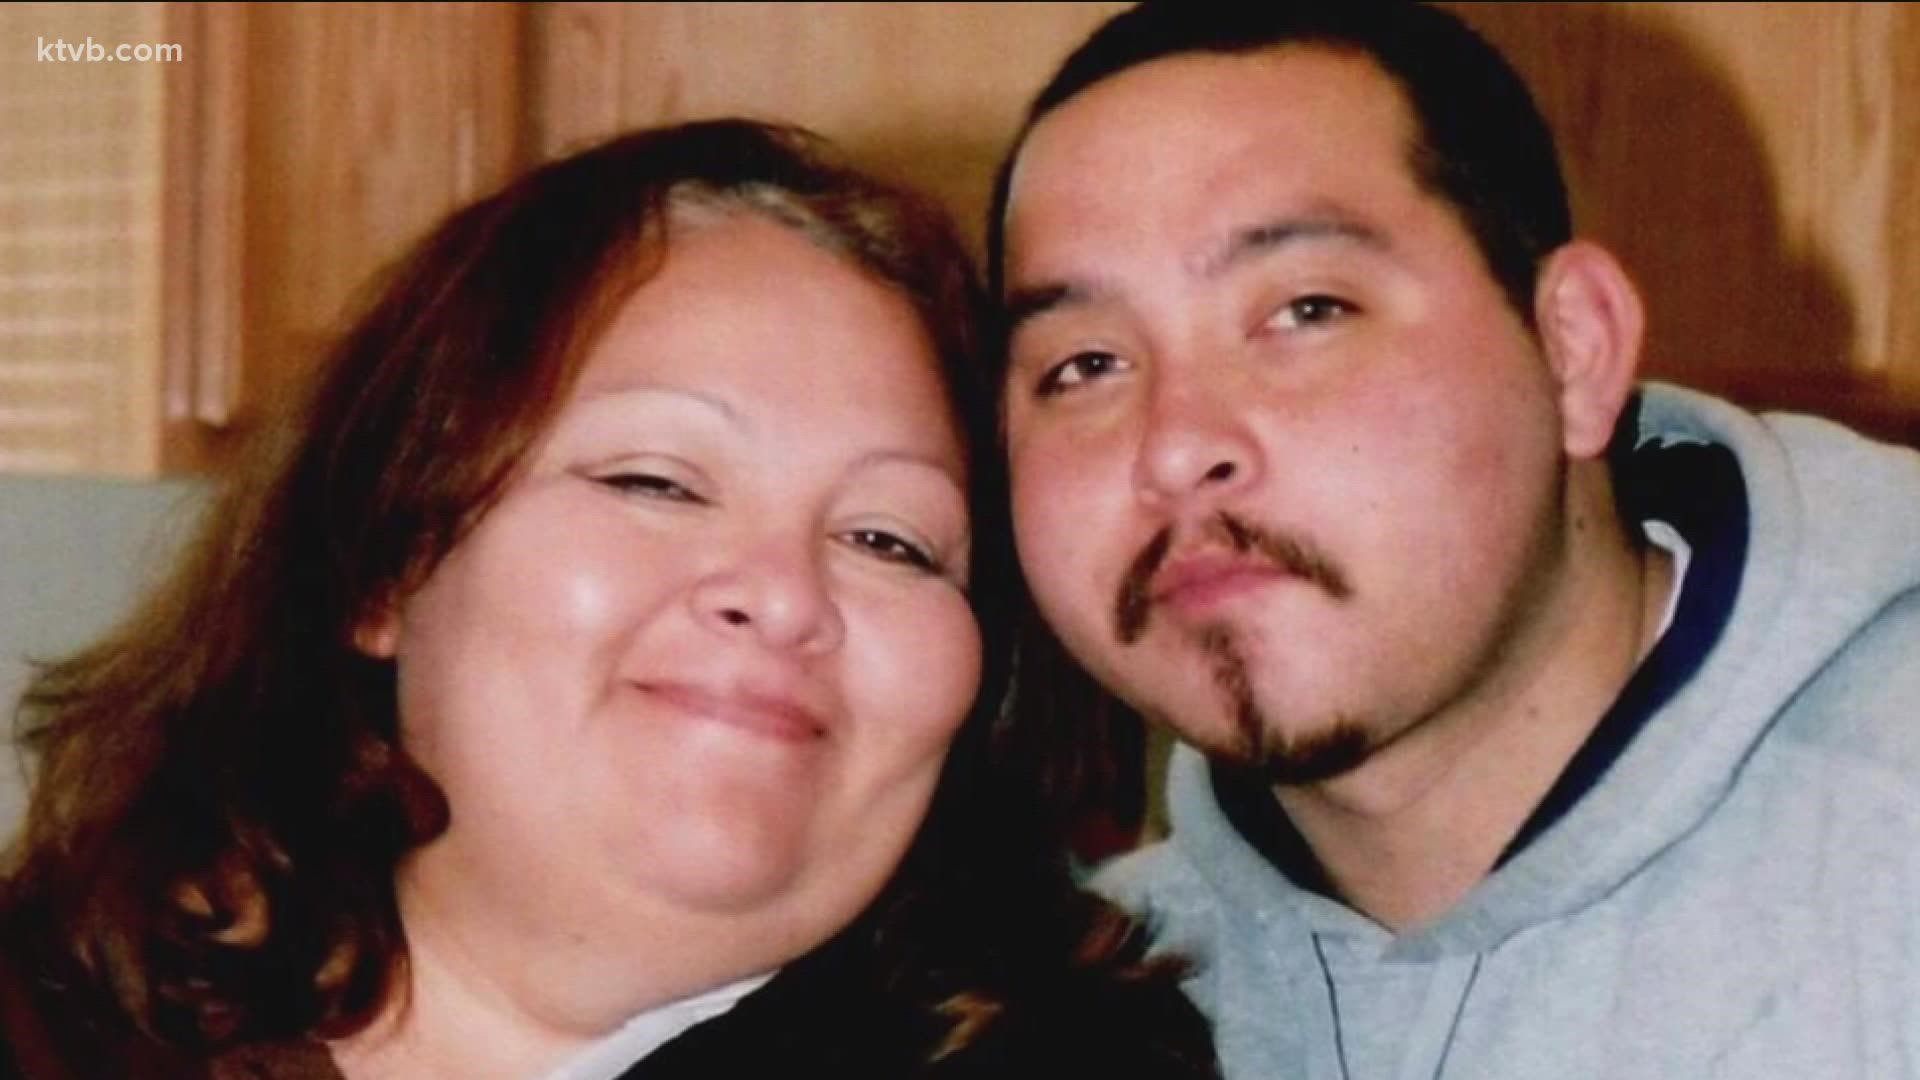 Michael Vasquez passed away on Sept. 18. Three days later, his mother Irene Zuniga died. Both tested positive for COVID-19.